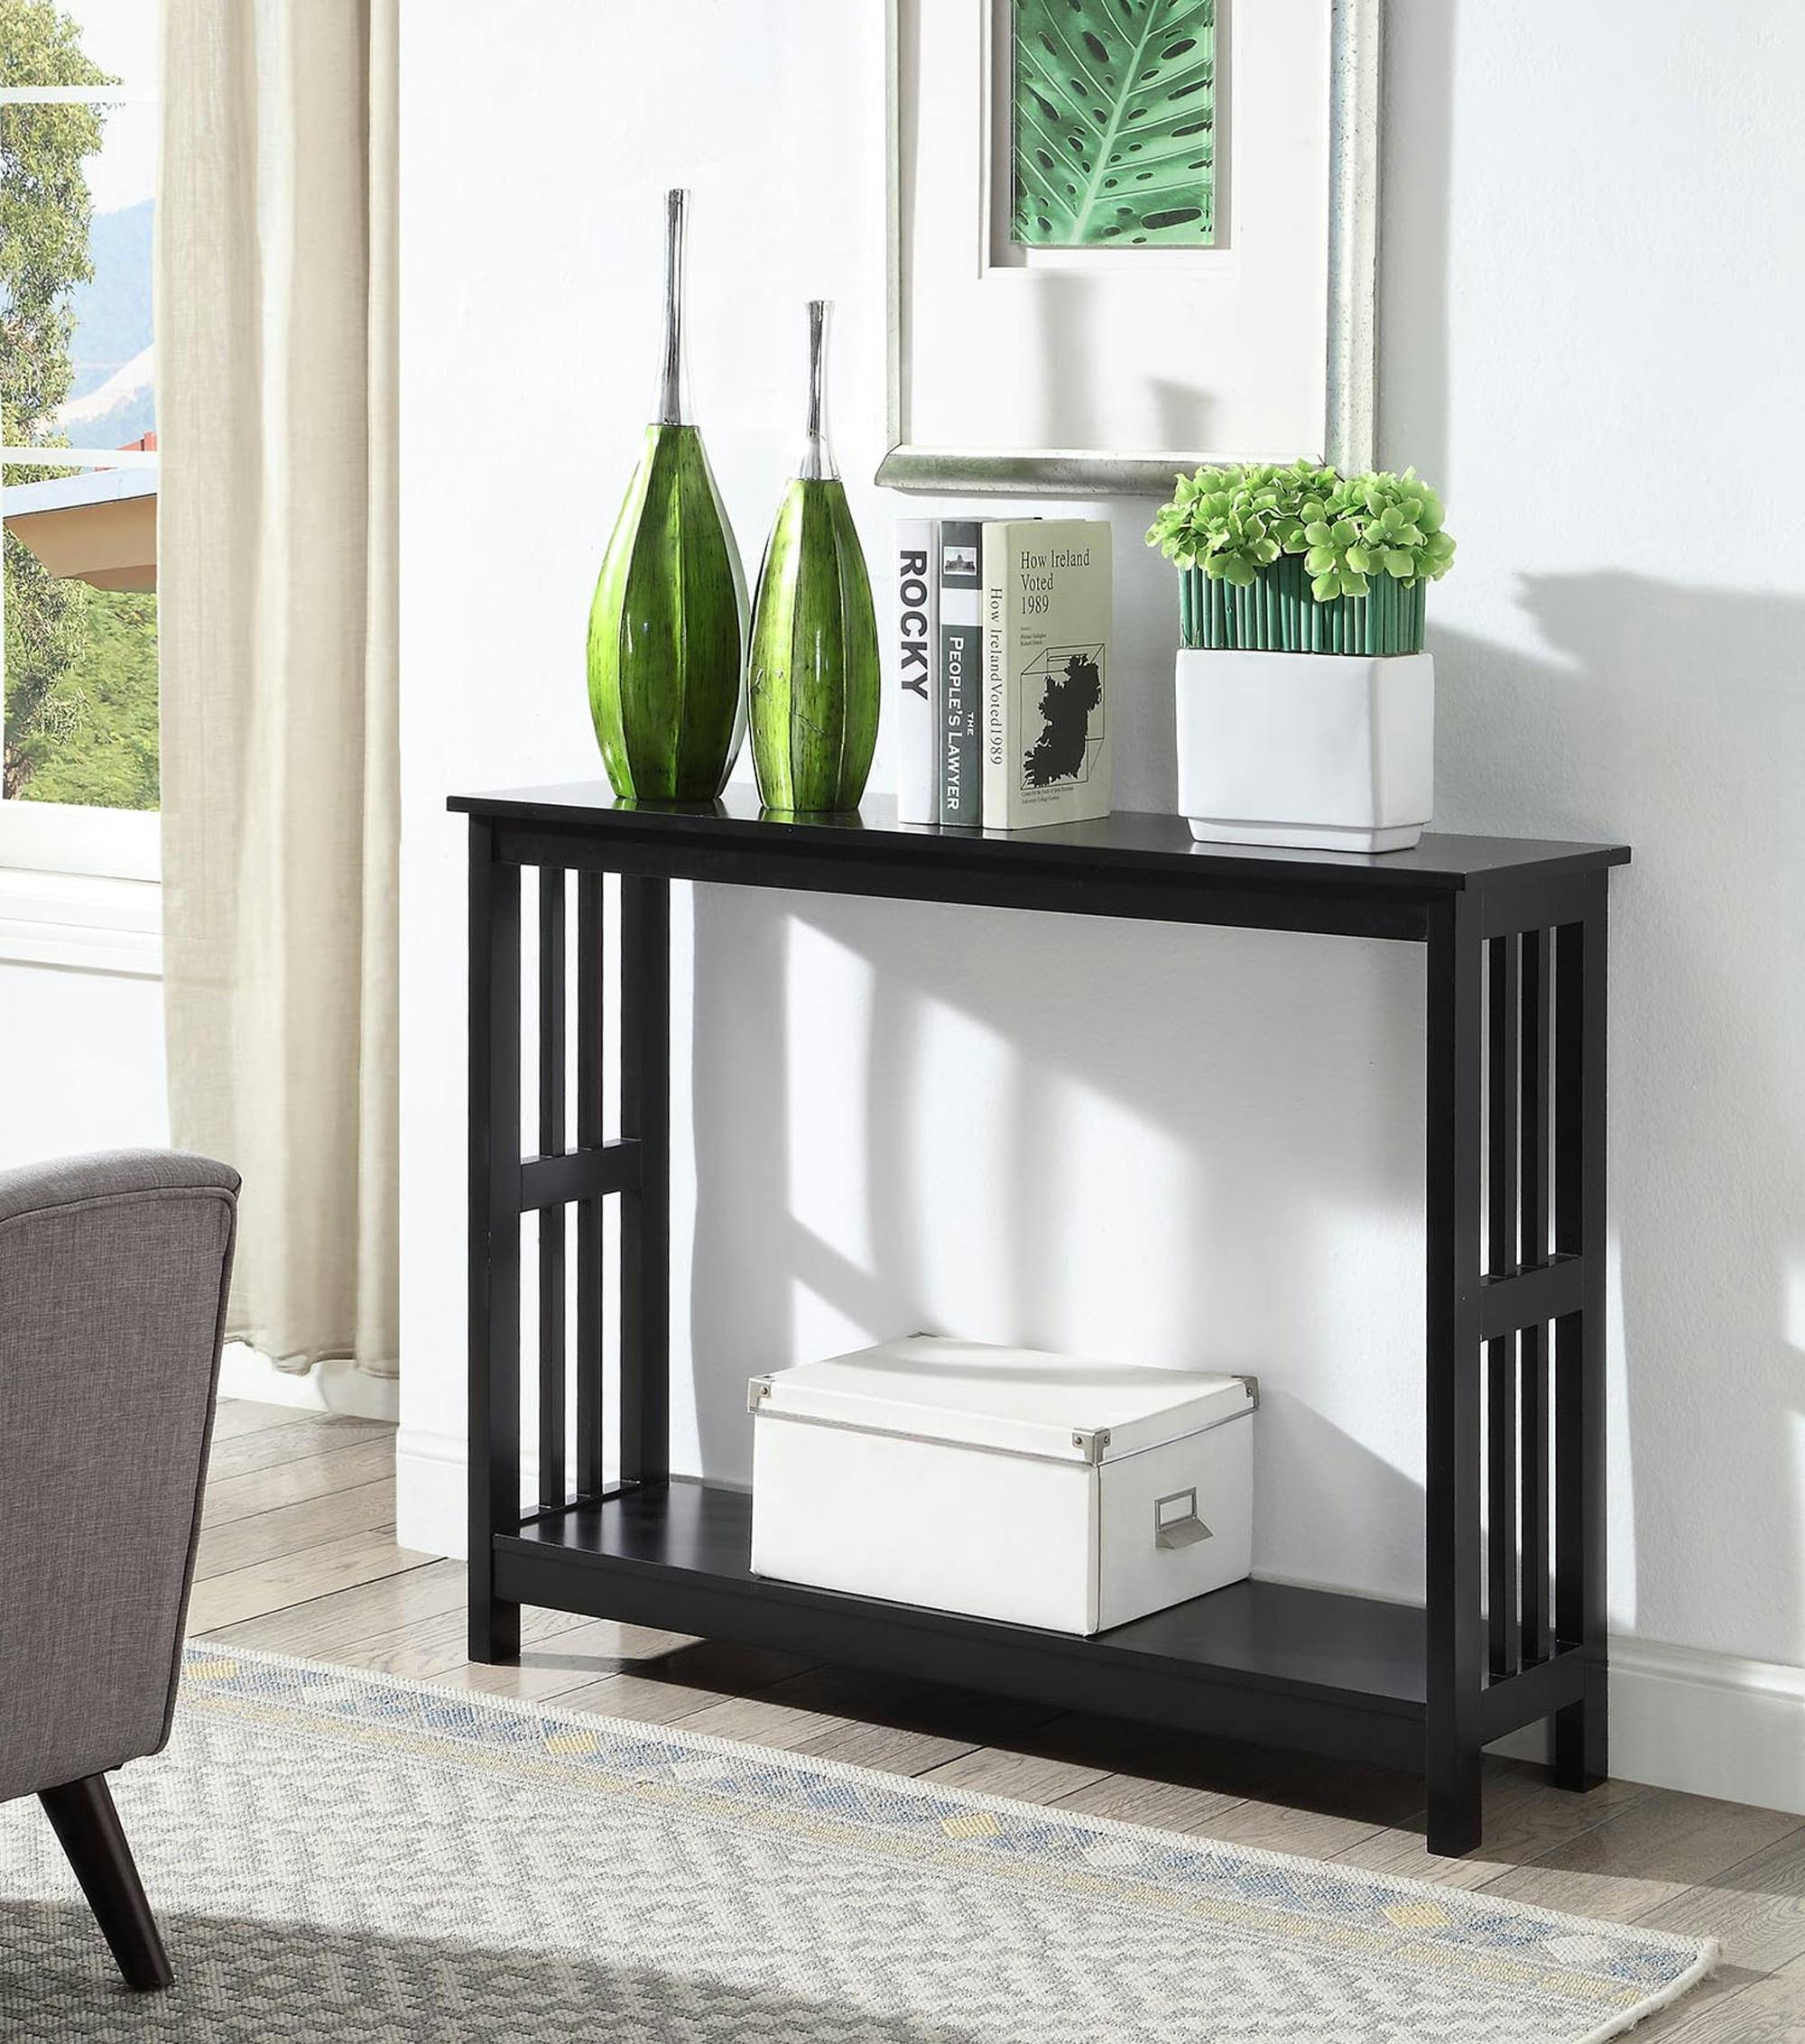 Urban Industrial Mission Console Table with Storage, Black Wood and Metal